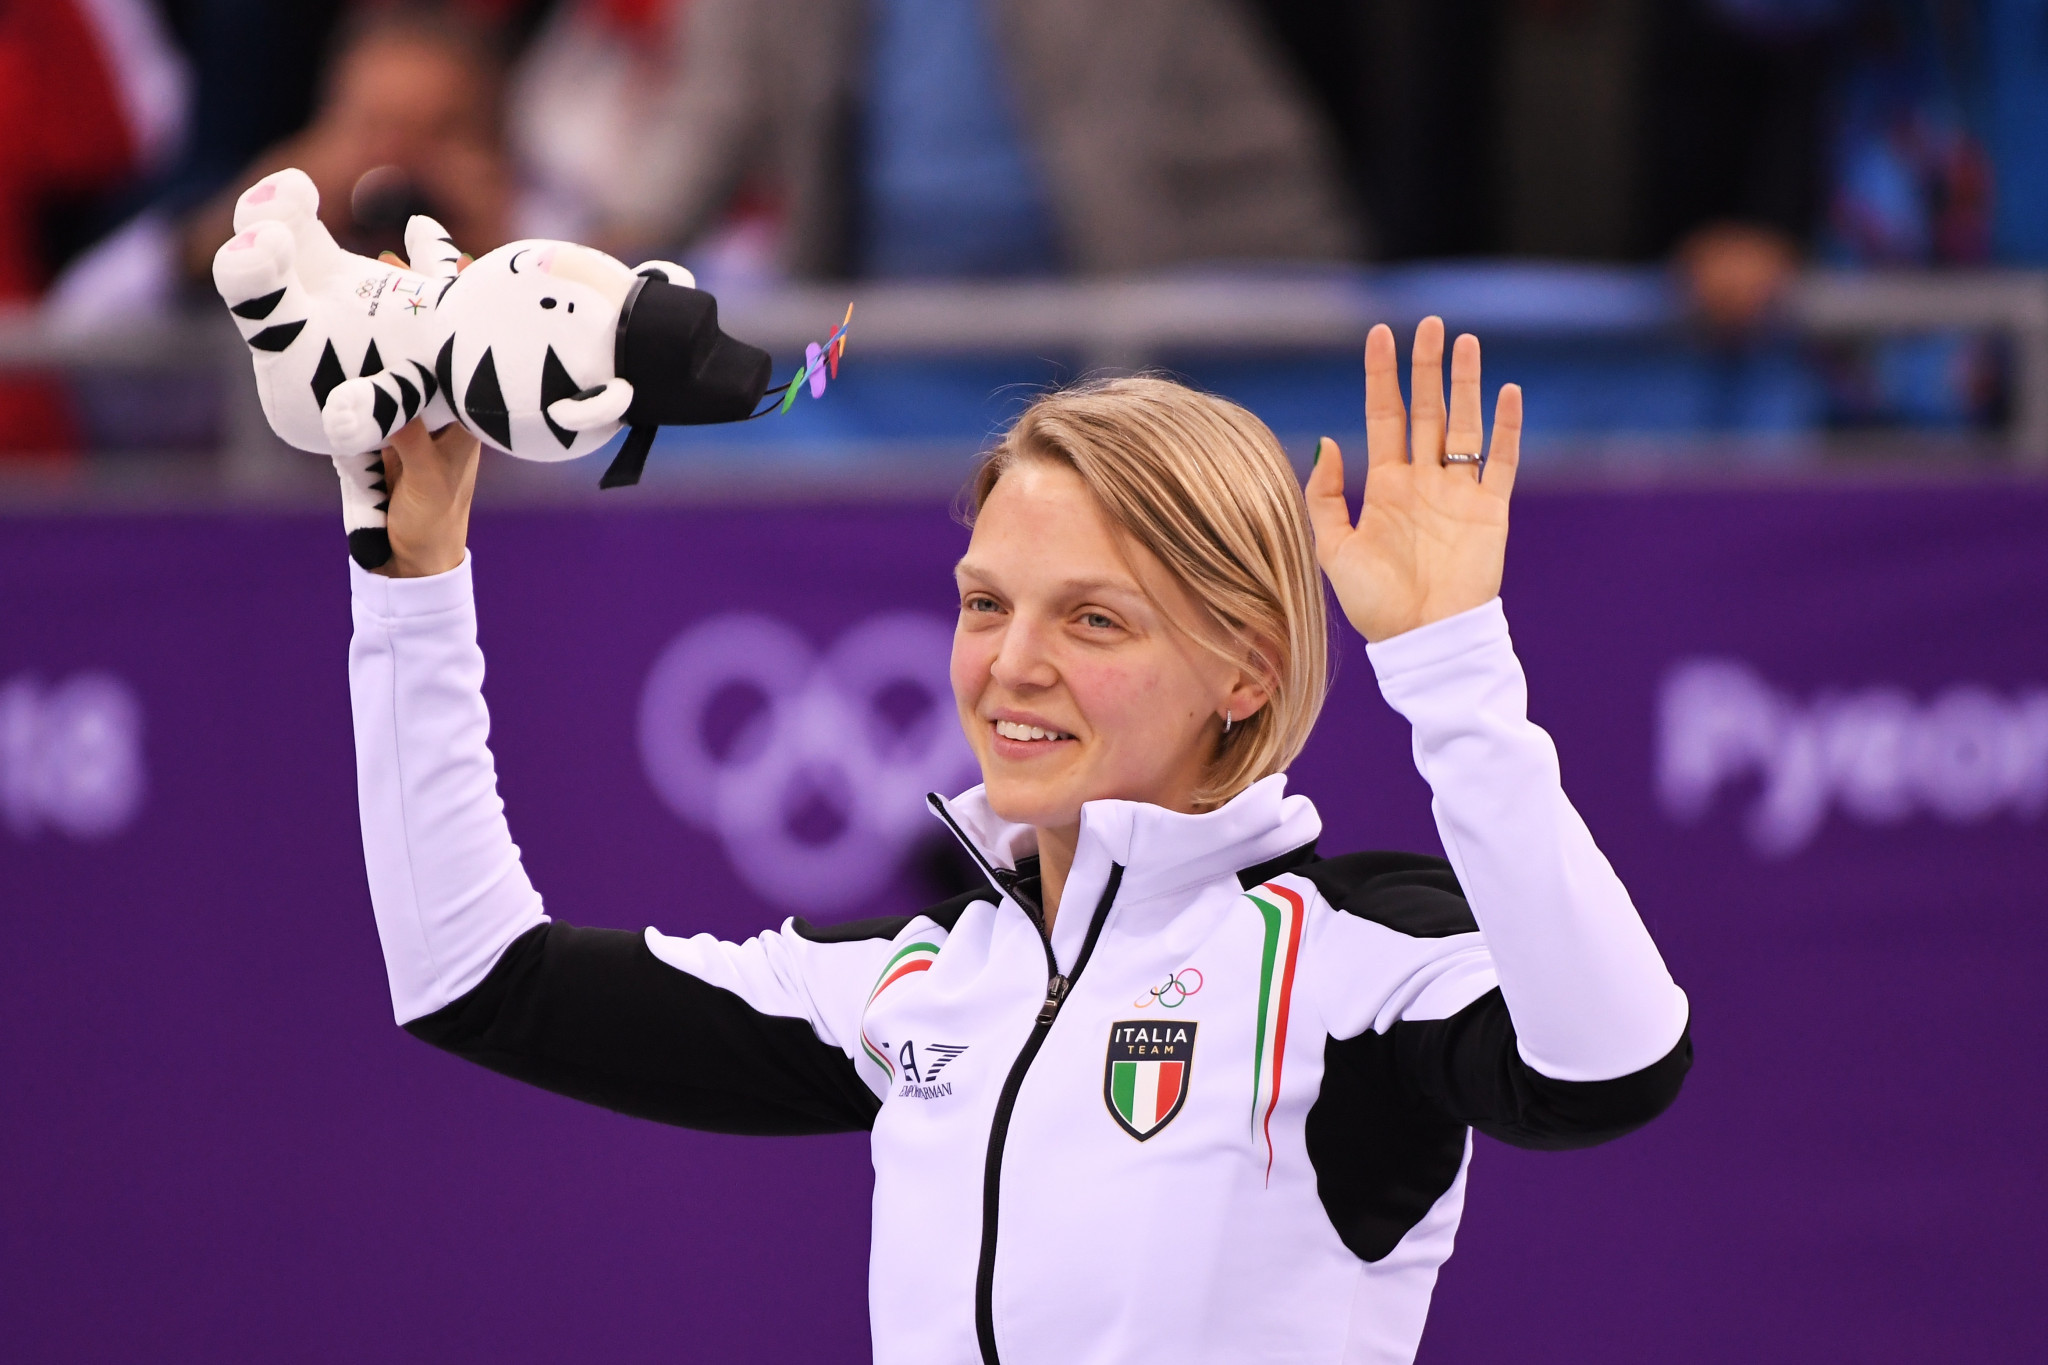 Italy’s Arianna Fontana claimed her first-ever Olympic gold medal after winning the women’s 500 metres short track speed skating final in dramatic fashion ©Getty Images